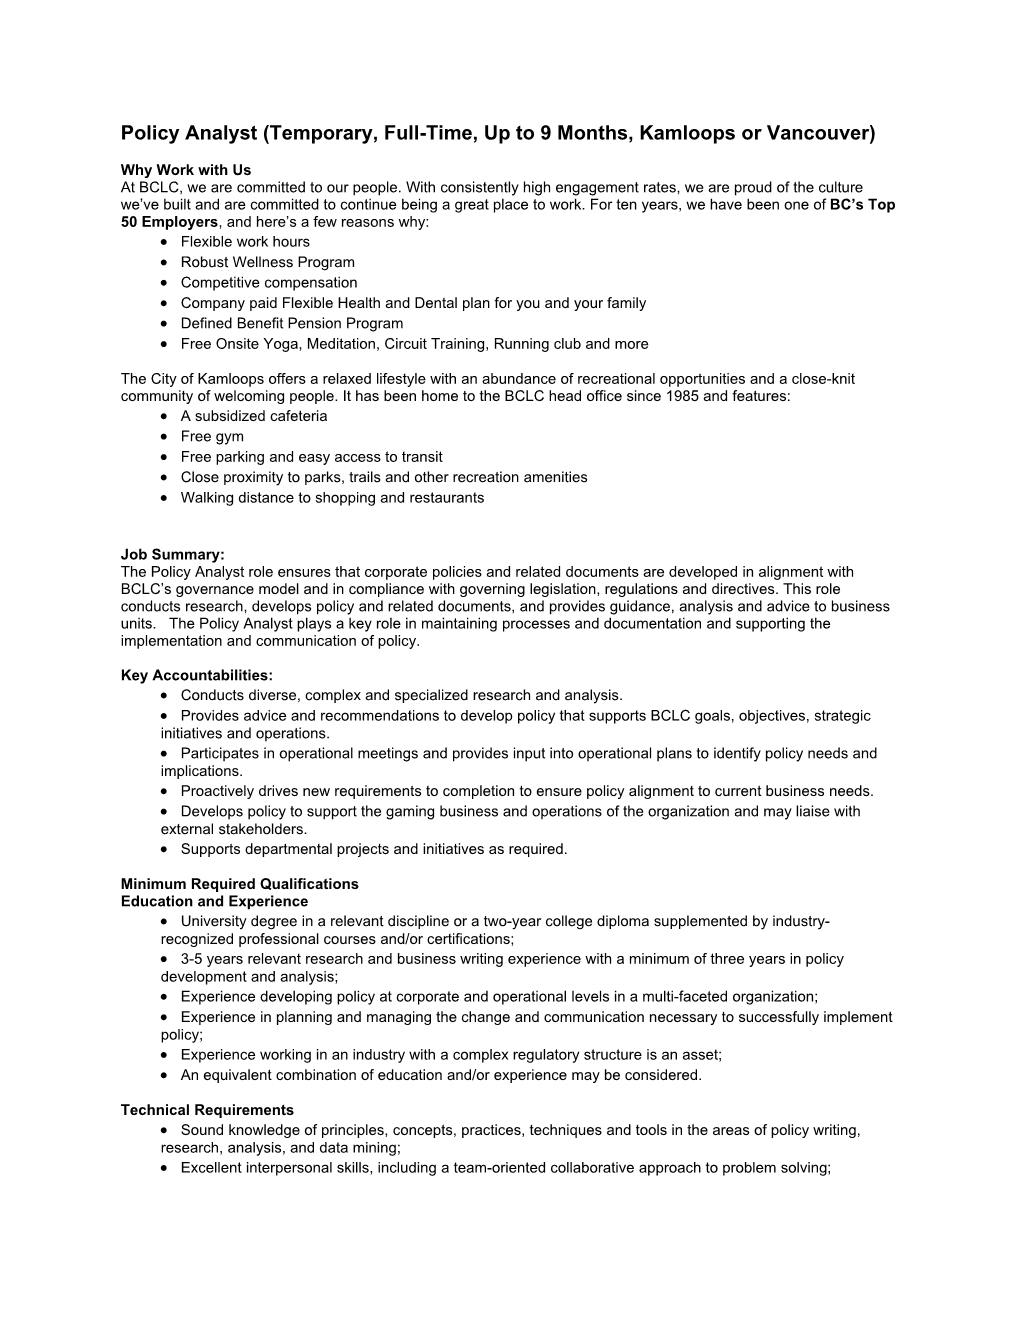 Policy Analyst (Temporary, Full-Time, up to 9 Months, Kamloops Or Vancouver)